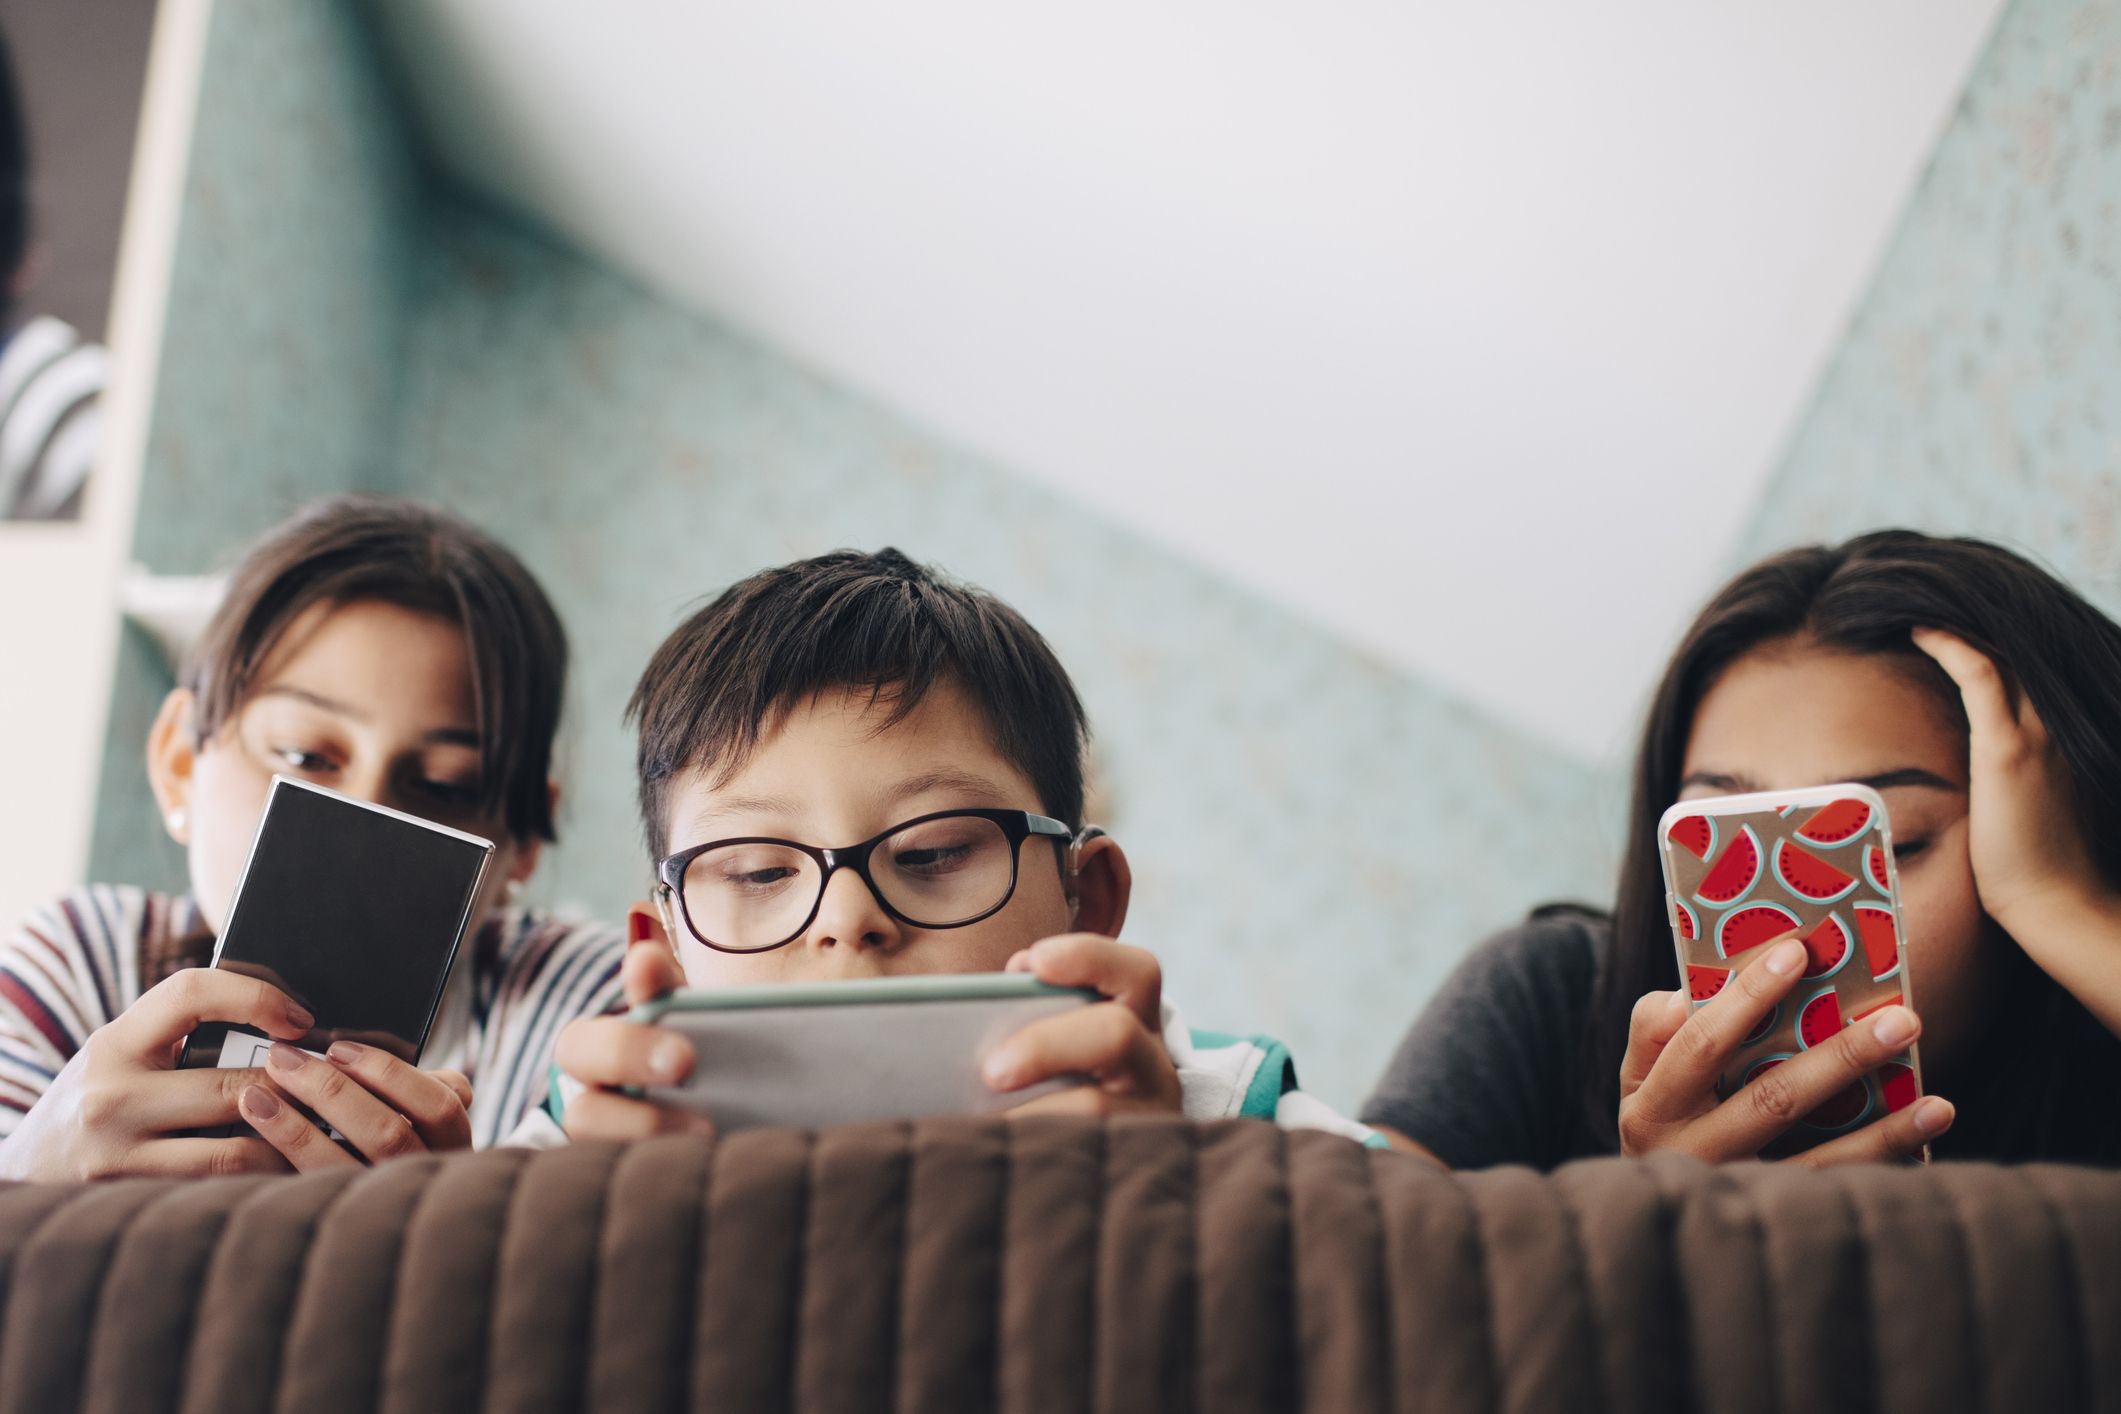 The 5 things you must do before giving a child a smartphone